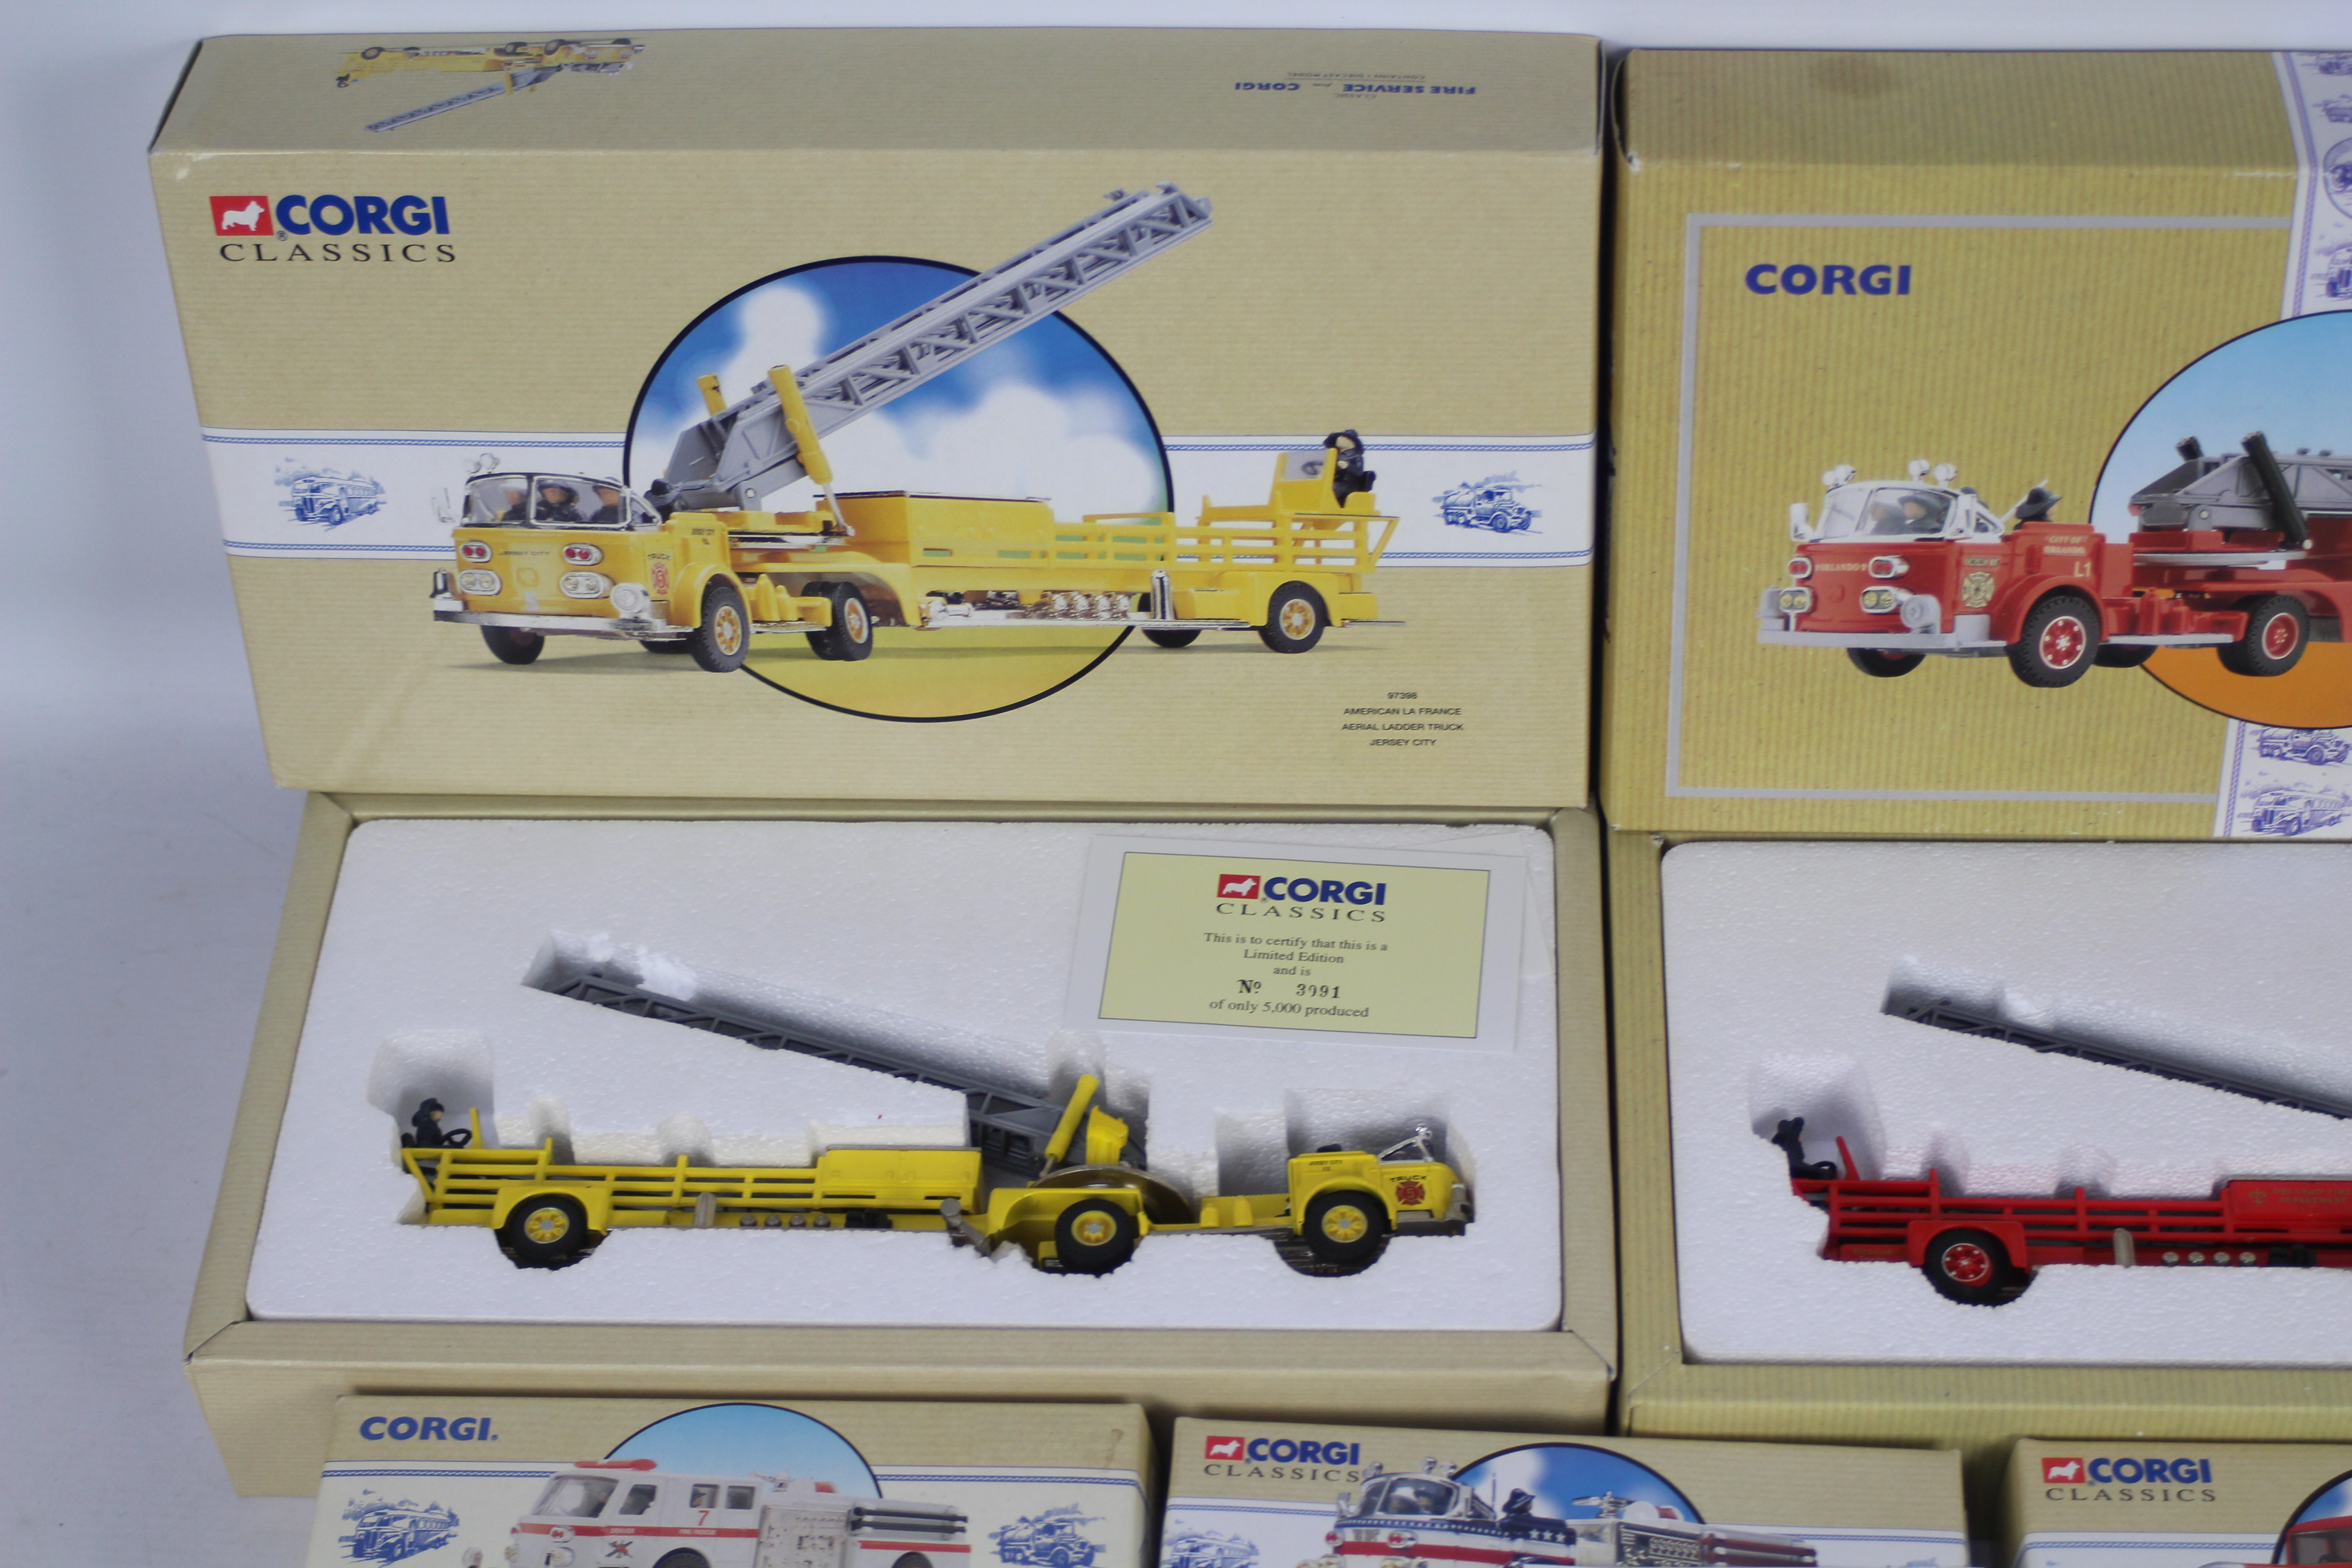 Corgi - 5 x boxed limited edition American LaFrance Fire Trucks in 1:50 scale including # 97398 - Image 3 of 3